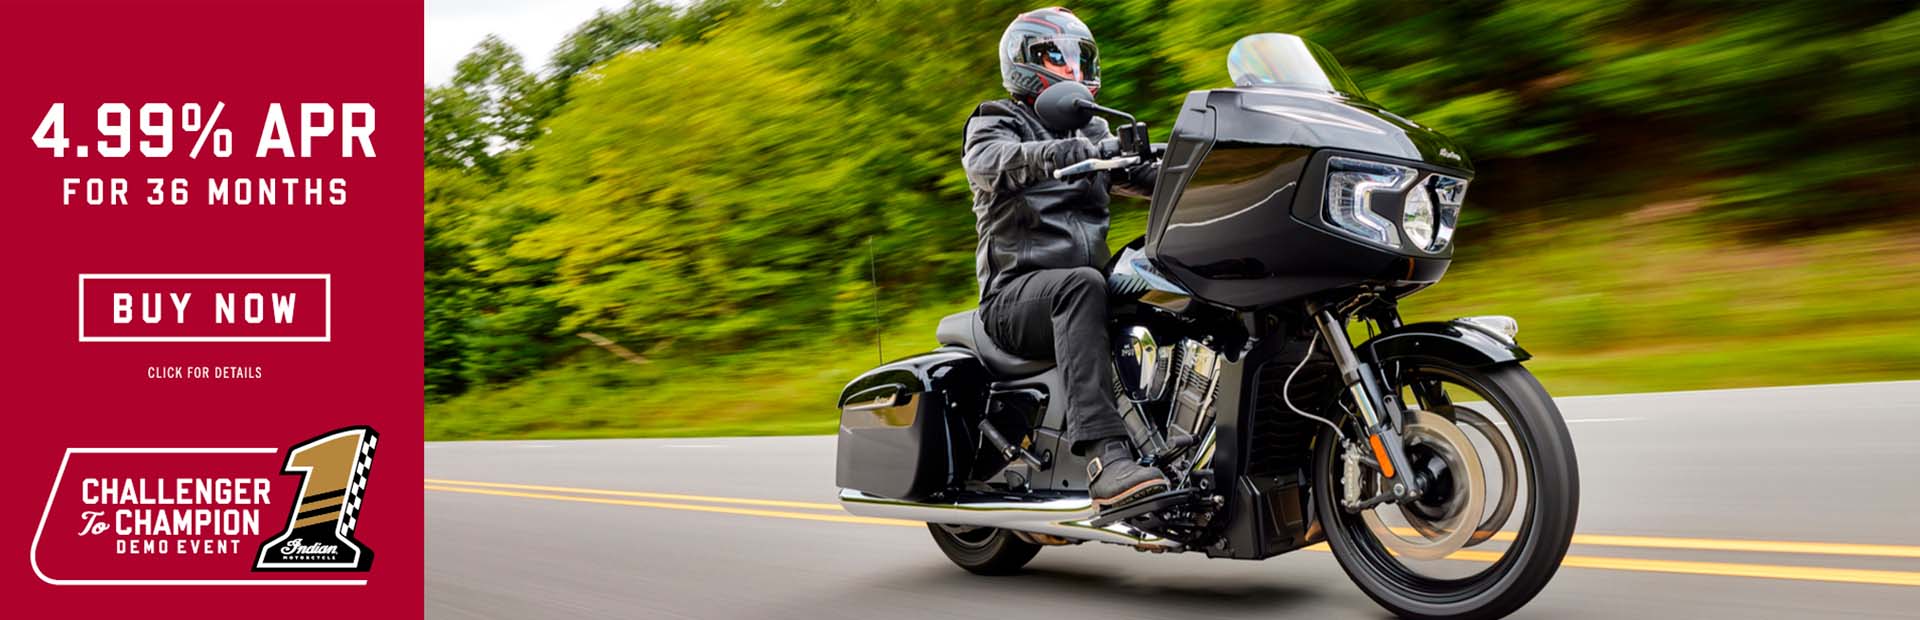 INDIAN MOTORCYCLES US - Financing Offer  US: 4.99% at Pikes Peak Indian Motorcycles